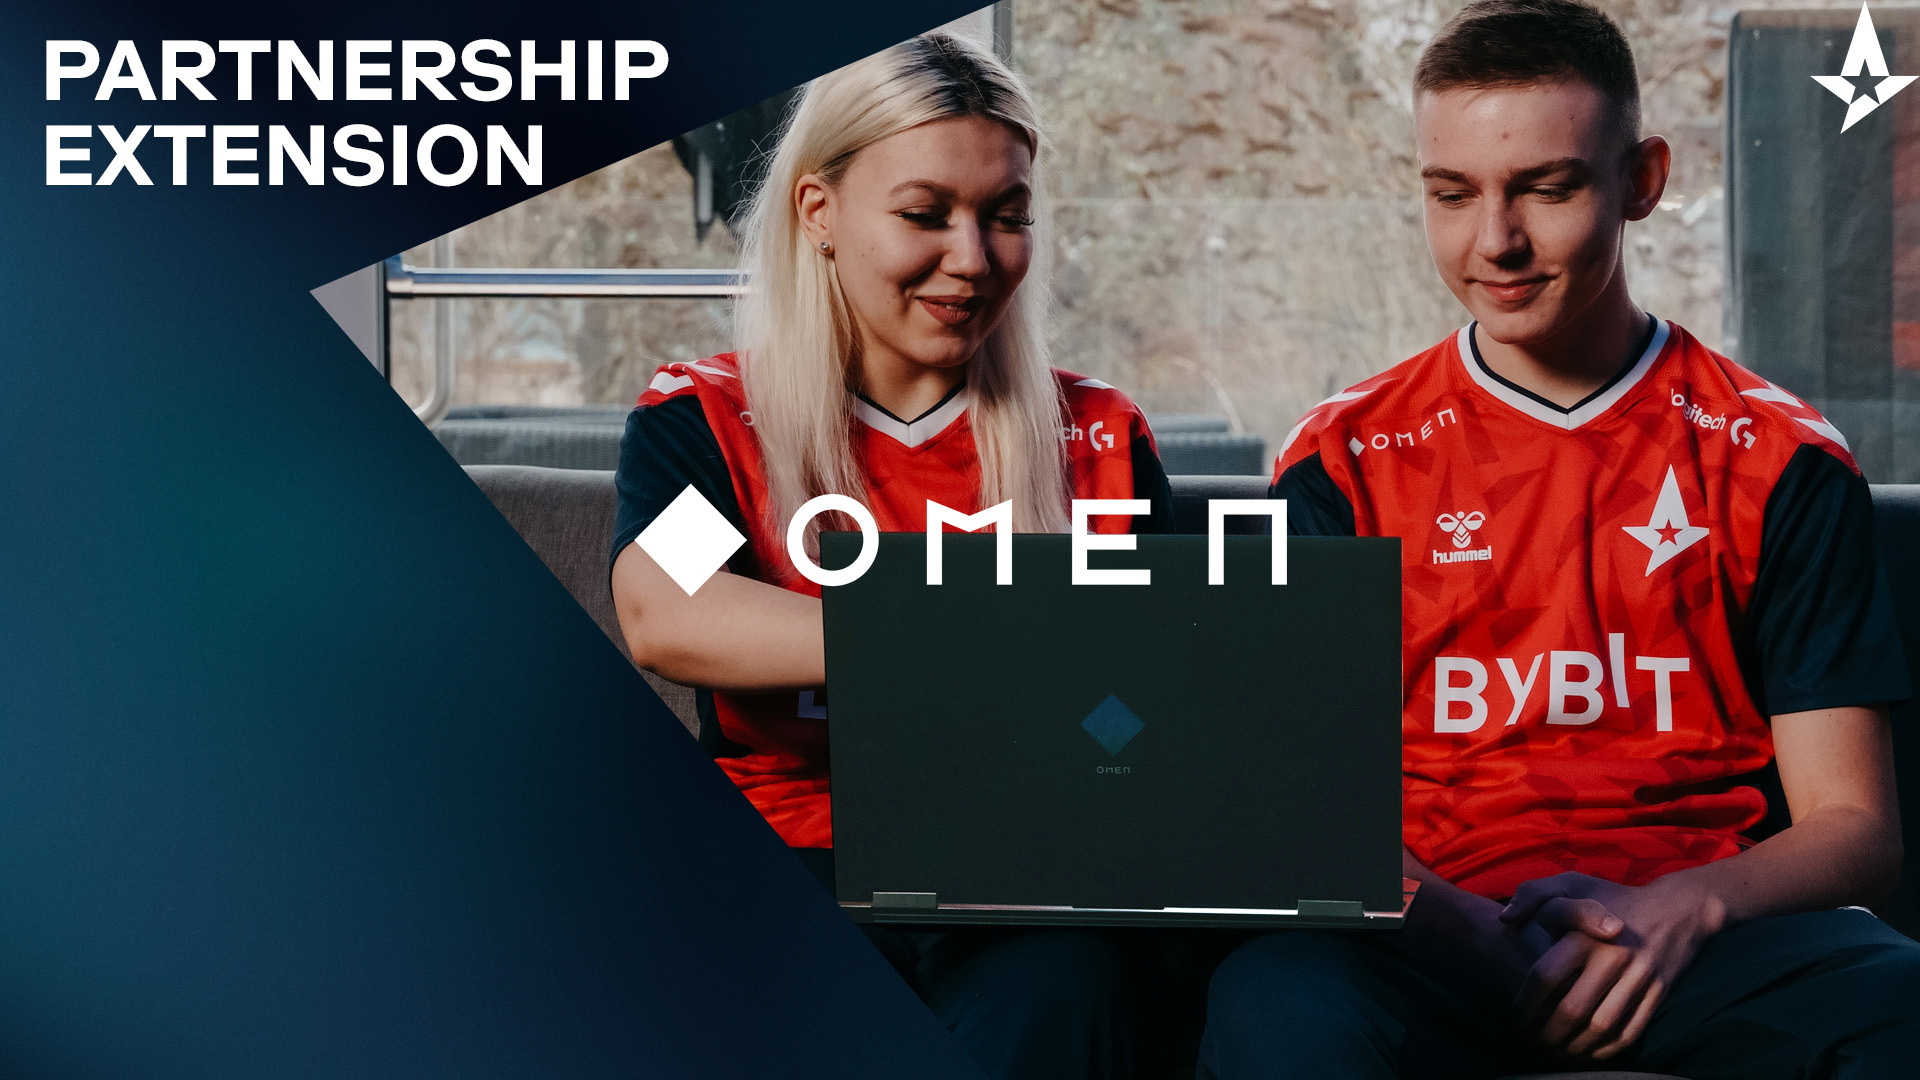 Astralis extends its partnership with HP